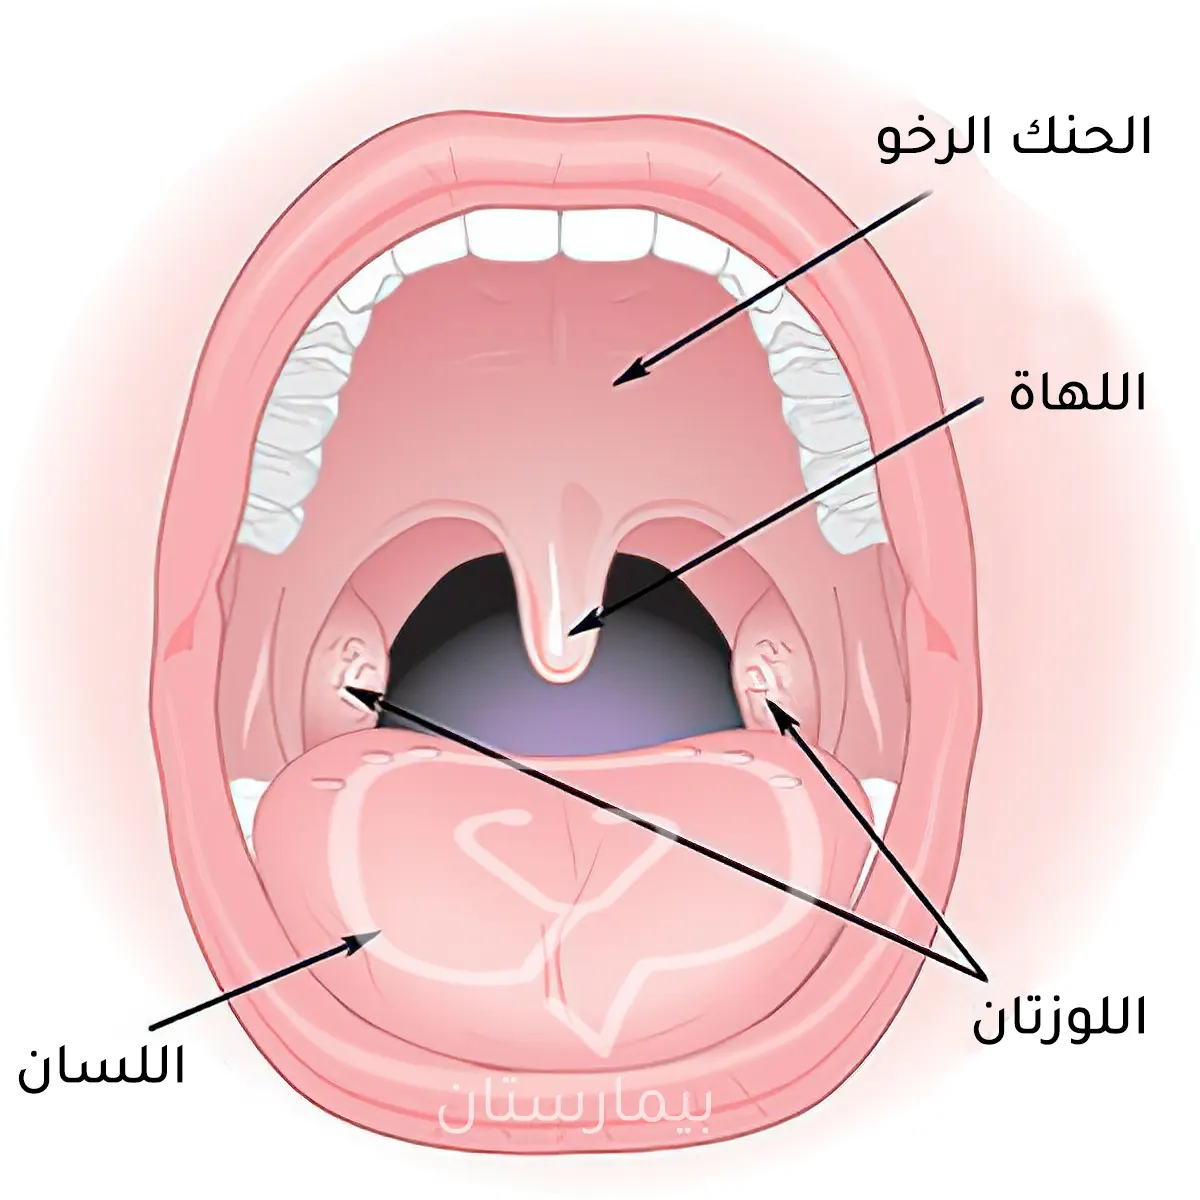 The site of the tonsils